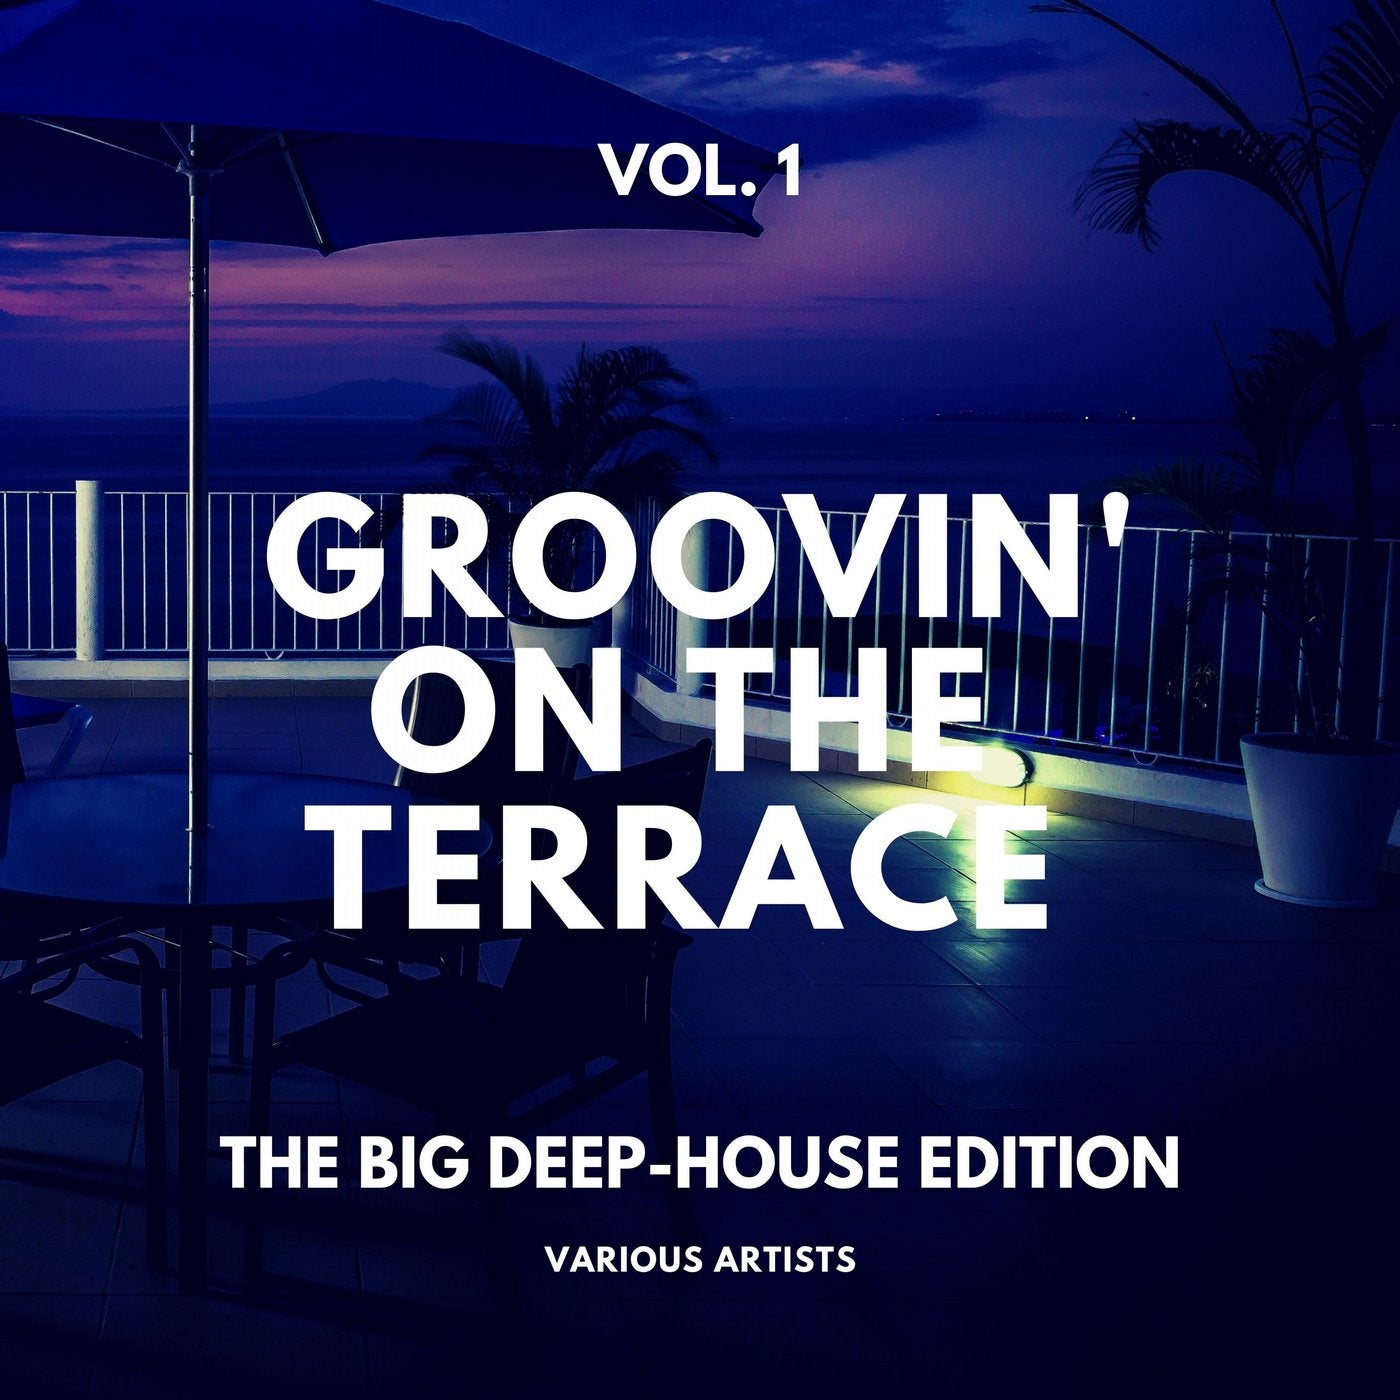 Groovin' on the Terrace (The Big Deep-House Edition), Vol. 1